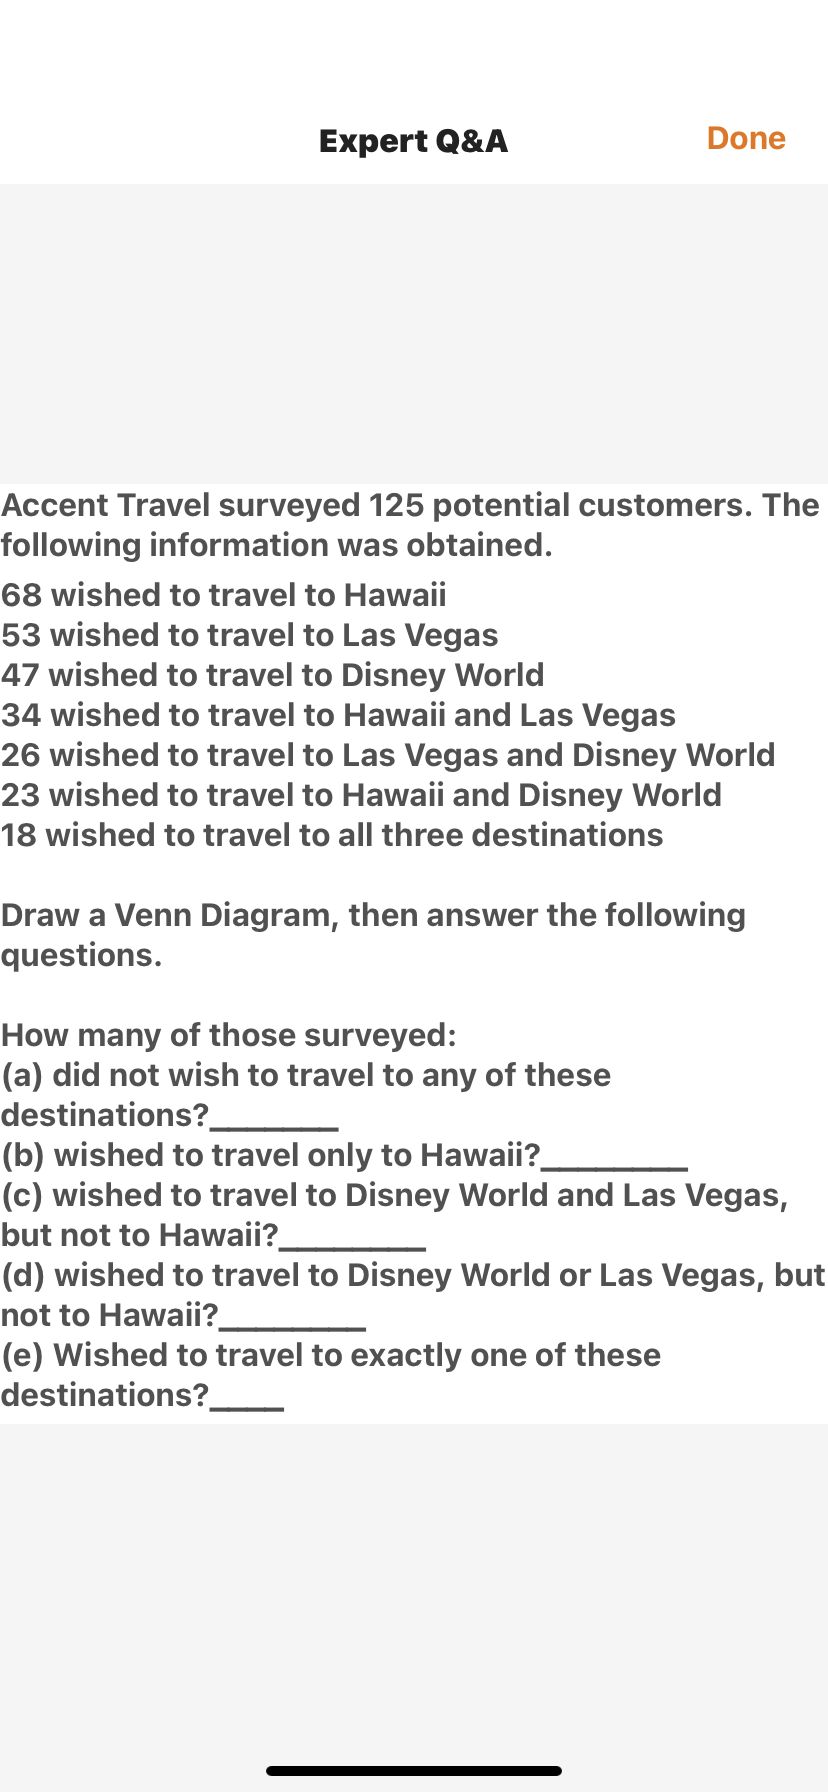 Expert Q&A
Done
Accent Travel surveyed 125 potential customers. The
following information was obtained.
68 wished to travel to Hawaii
53 wished to travel to Las Vegas
47 wished to travel to Disney World
34 wished to travel to Hawaii and Las Vegas
26 wished to travel to Las Vegas and Disney World
23 wished to travel to Hawaii and Disney World
18 wished to travel to all three destinations
Draw a Venn Diagram, then answer the following
questions.
How many of those surveyed:
(a) did not wish to travel to any of these
destinations?.
(b) wished to travel only to Hawaii?
(c) wished to travel to Disney World and Las Vegas,
but not to Hawaii?
(d) wished to travel to Disney World or Las Vegas, but
not to Hawaii?
(e) Wished to travel to exactly one of these
destinations?.
